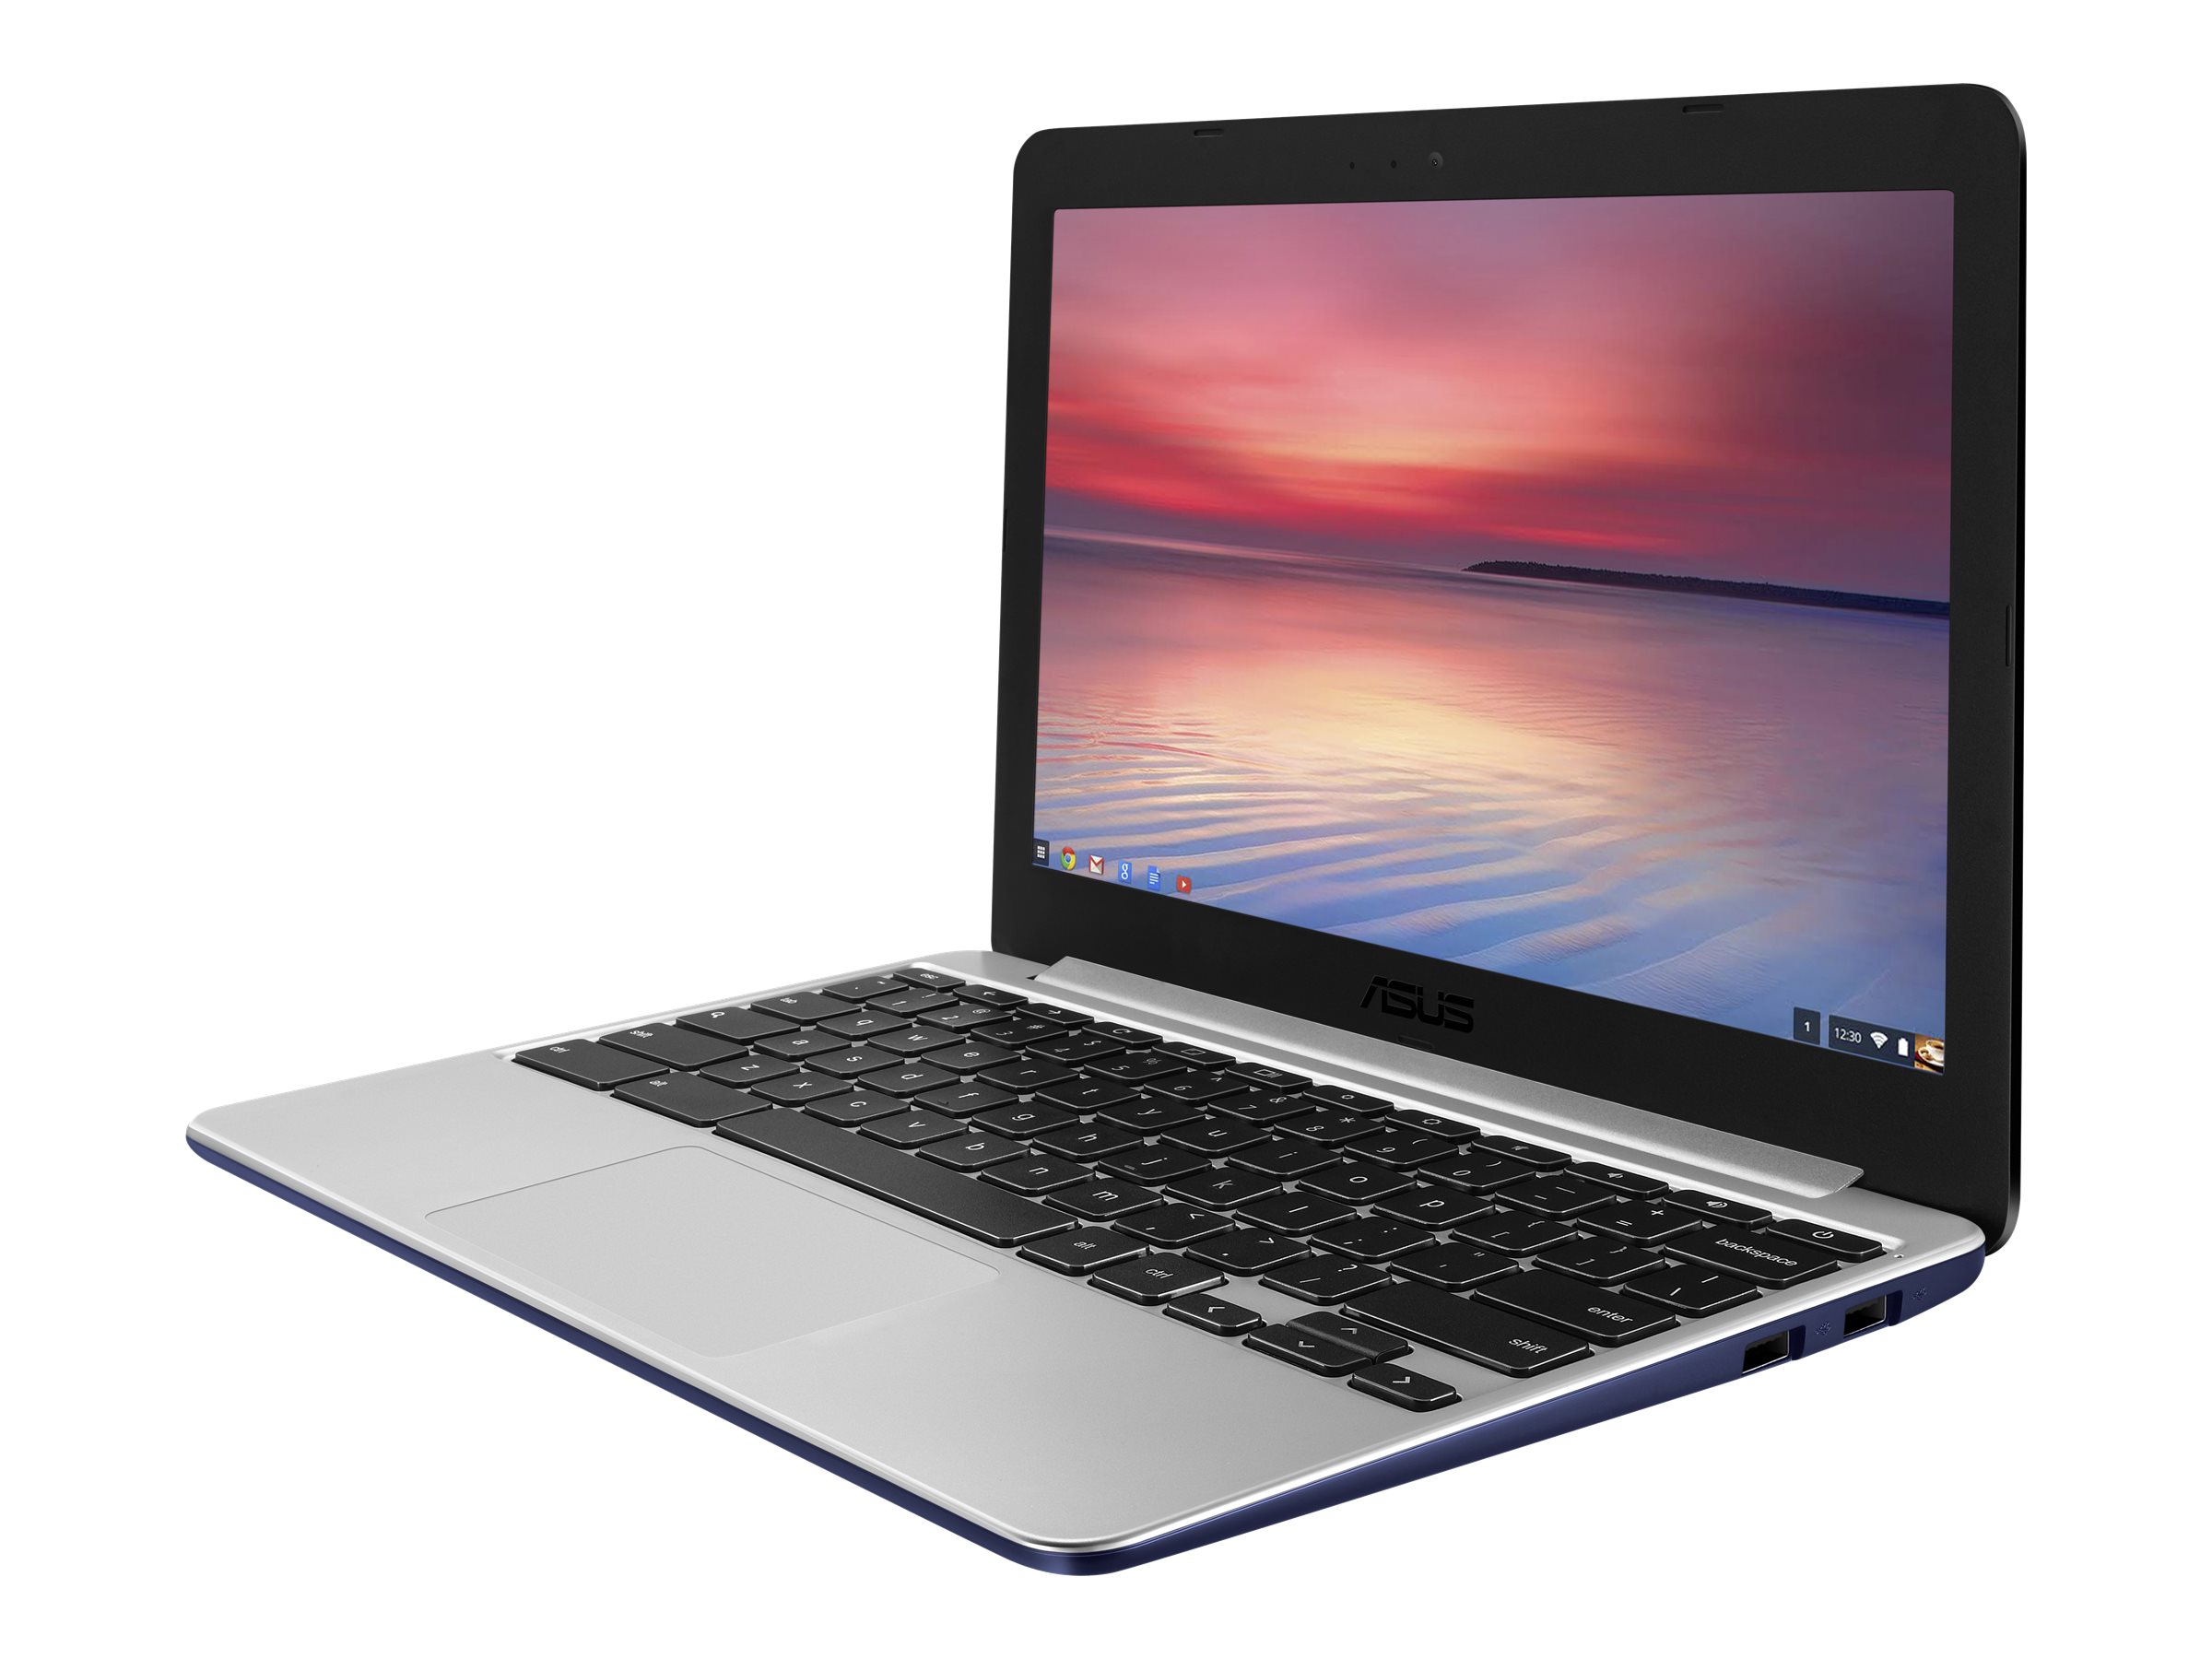 ASUS Chromebook C201PA (FD0008) - pictures, photos and images